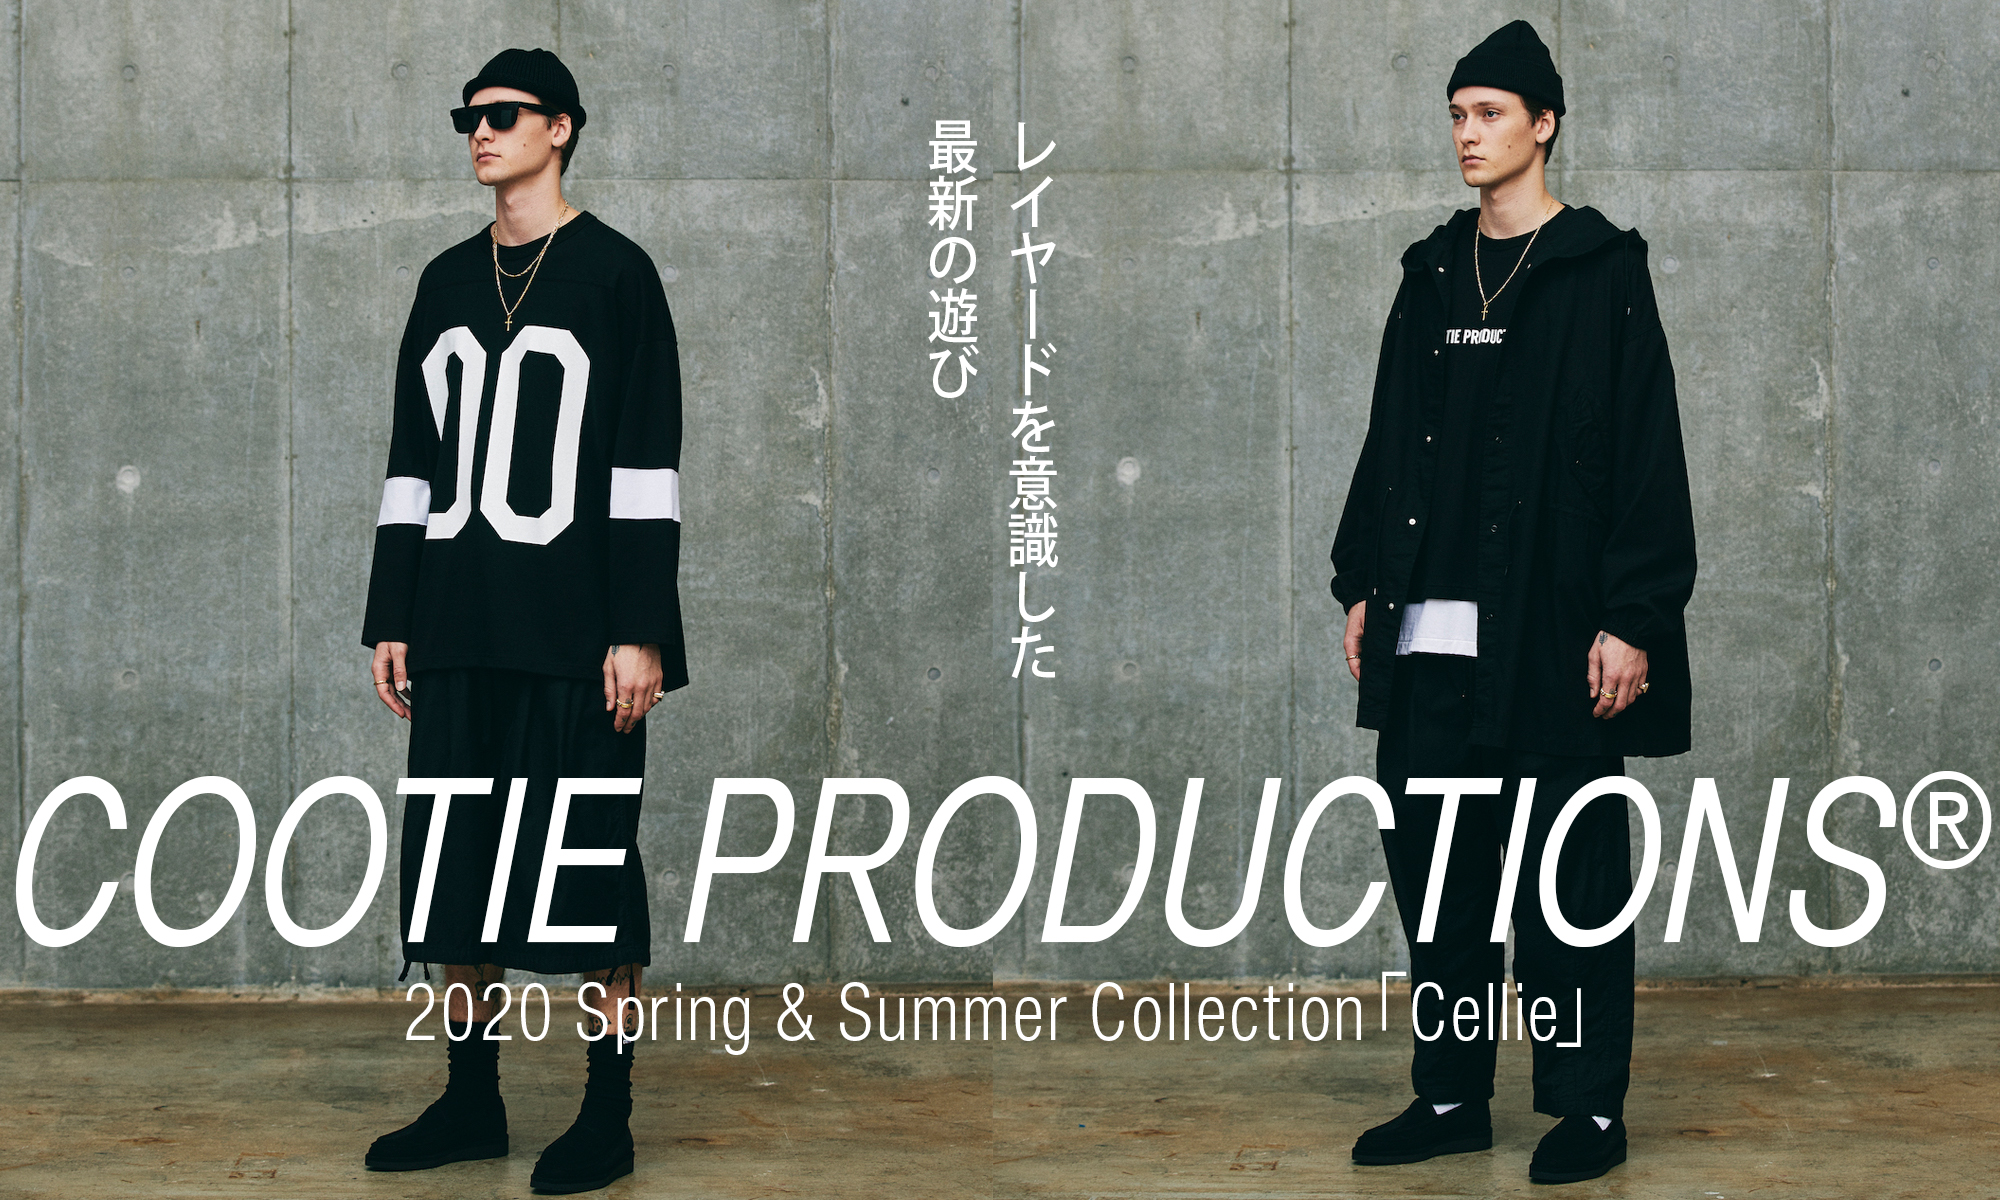 COOTIE PRODUCTIONS® - 2020 Spring & Summer- | RUDO-WEB